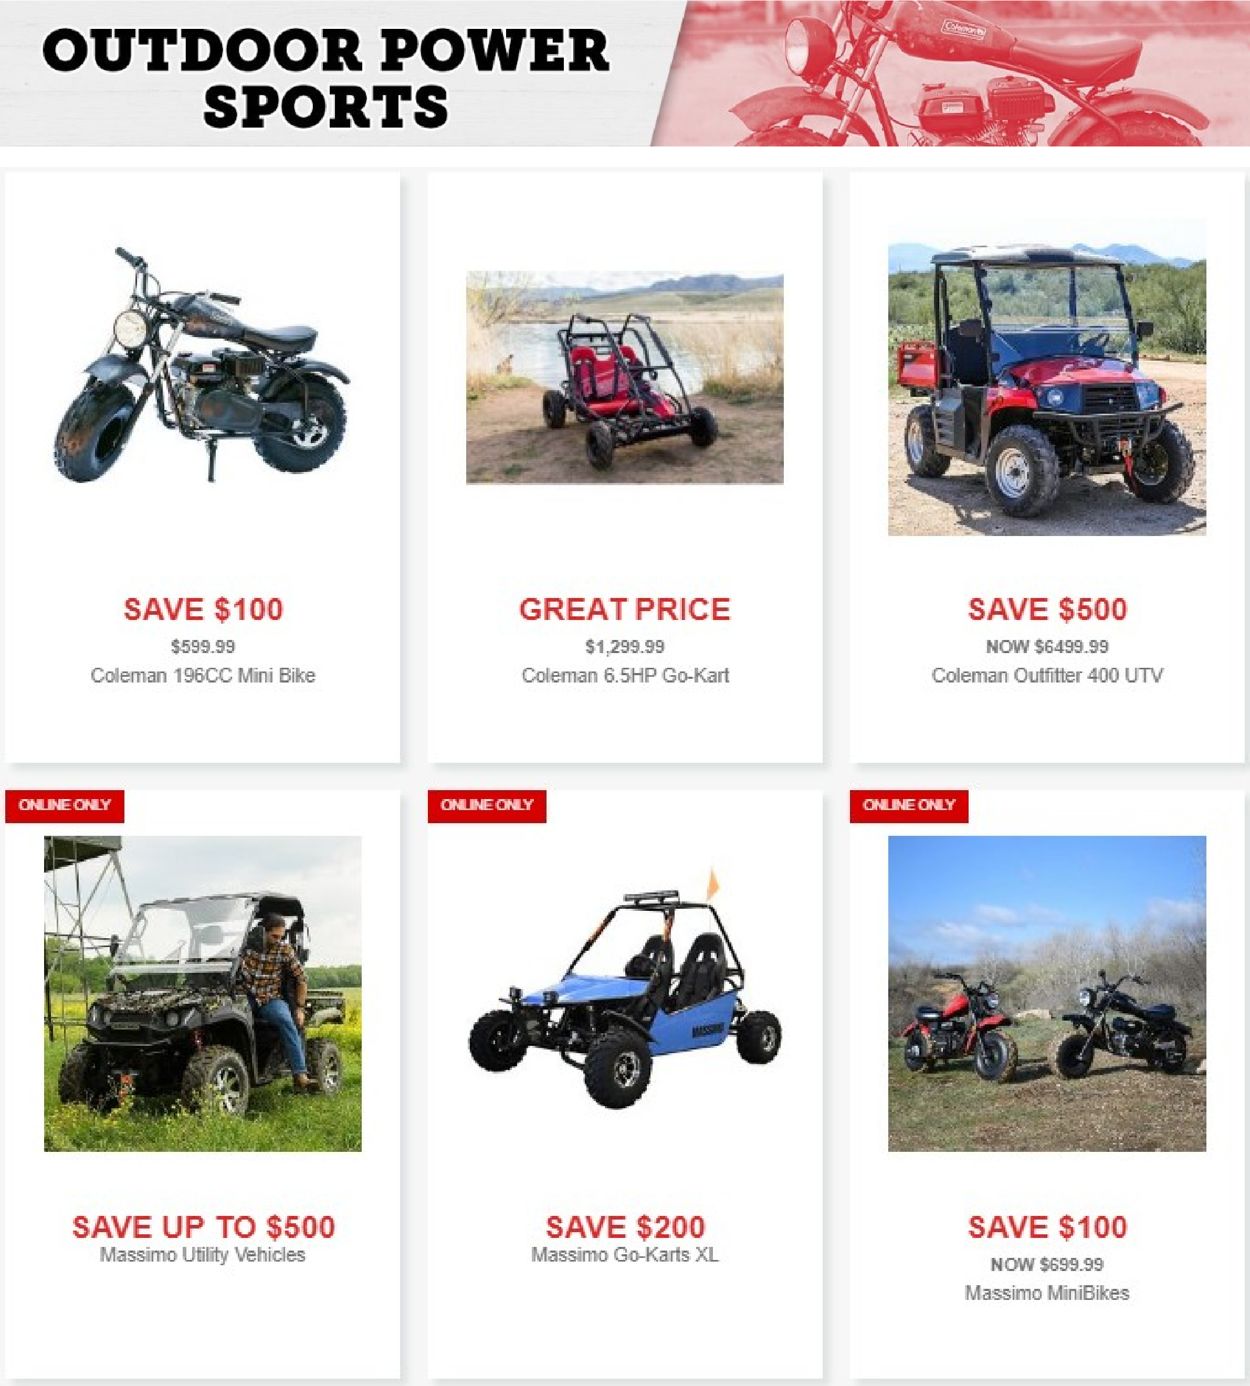 Catalogue Tractor Supply Holiday Gift Guide 2020 from 12/13/2020